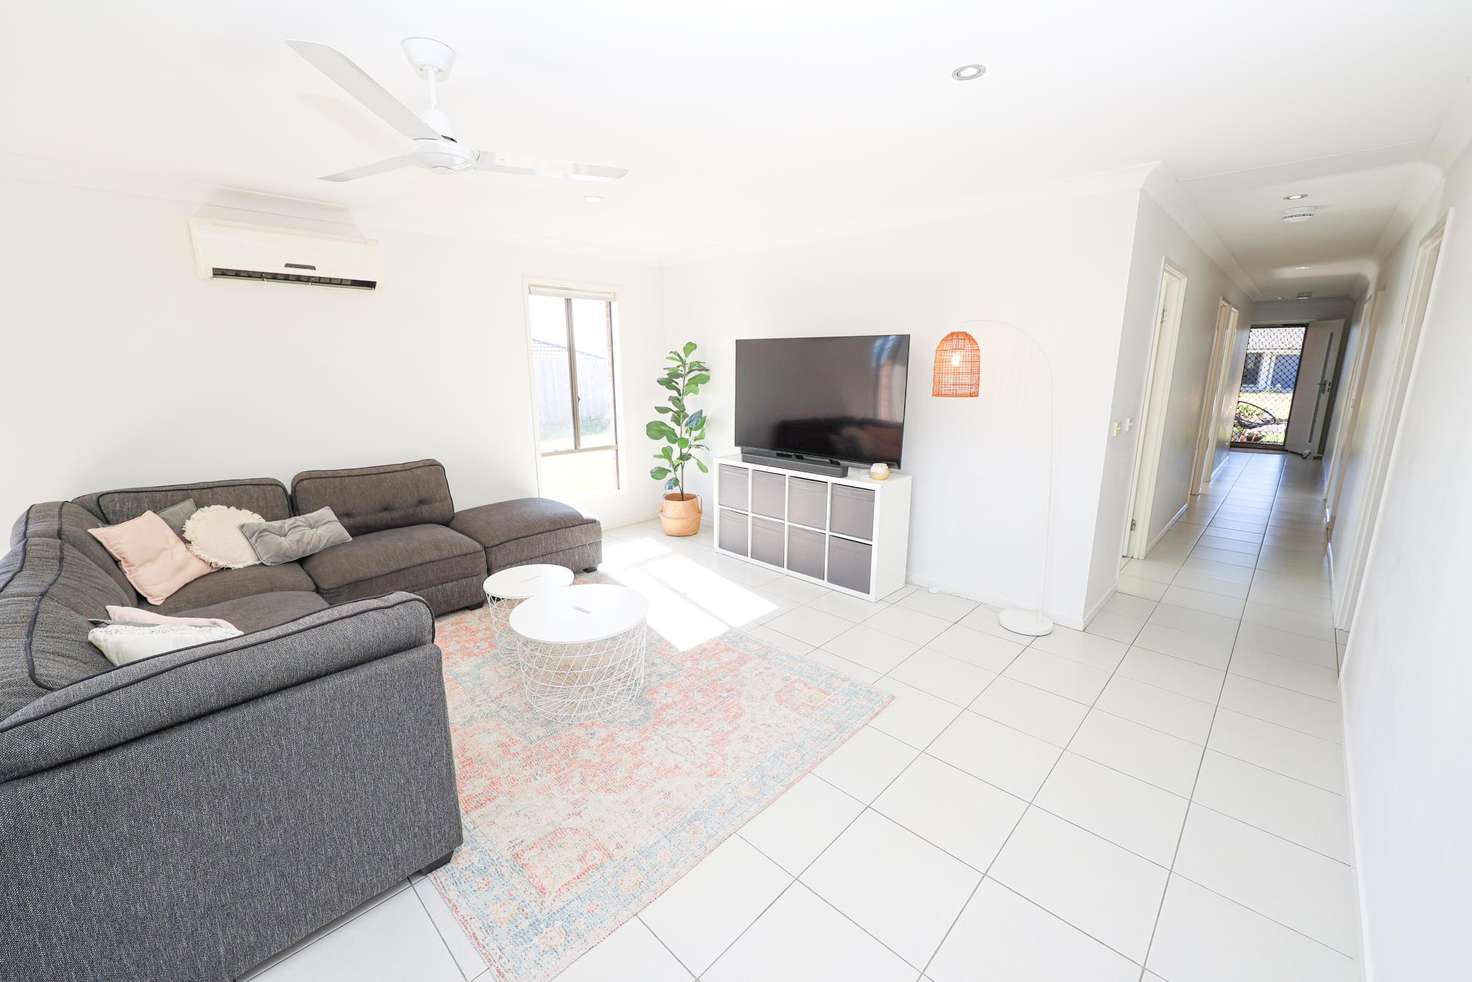 Main view of Homely house listing, 36 Peregrine Drive, Lowood QLD 4311